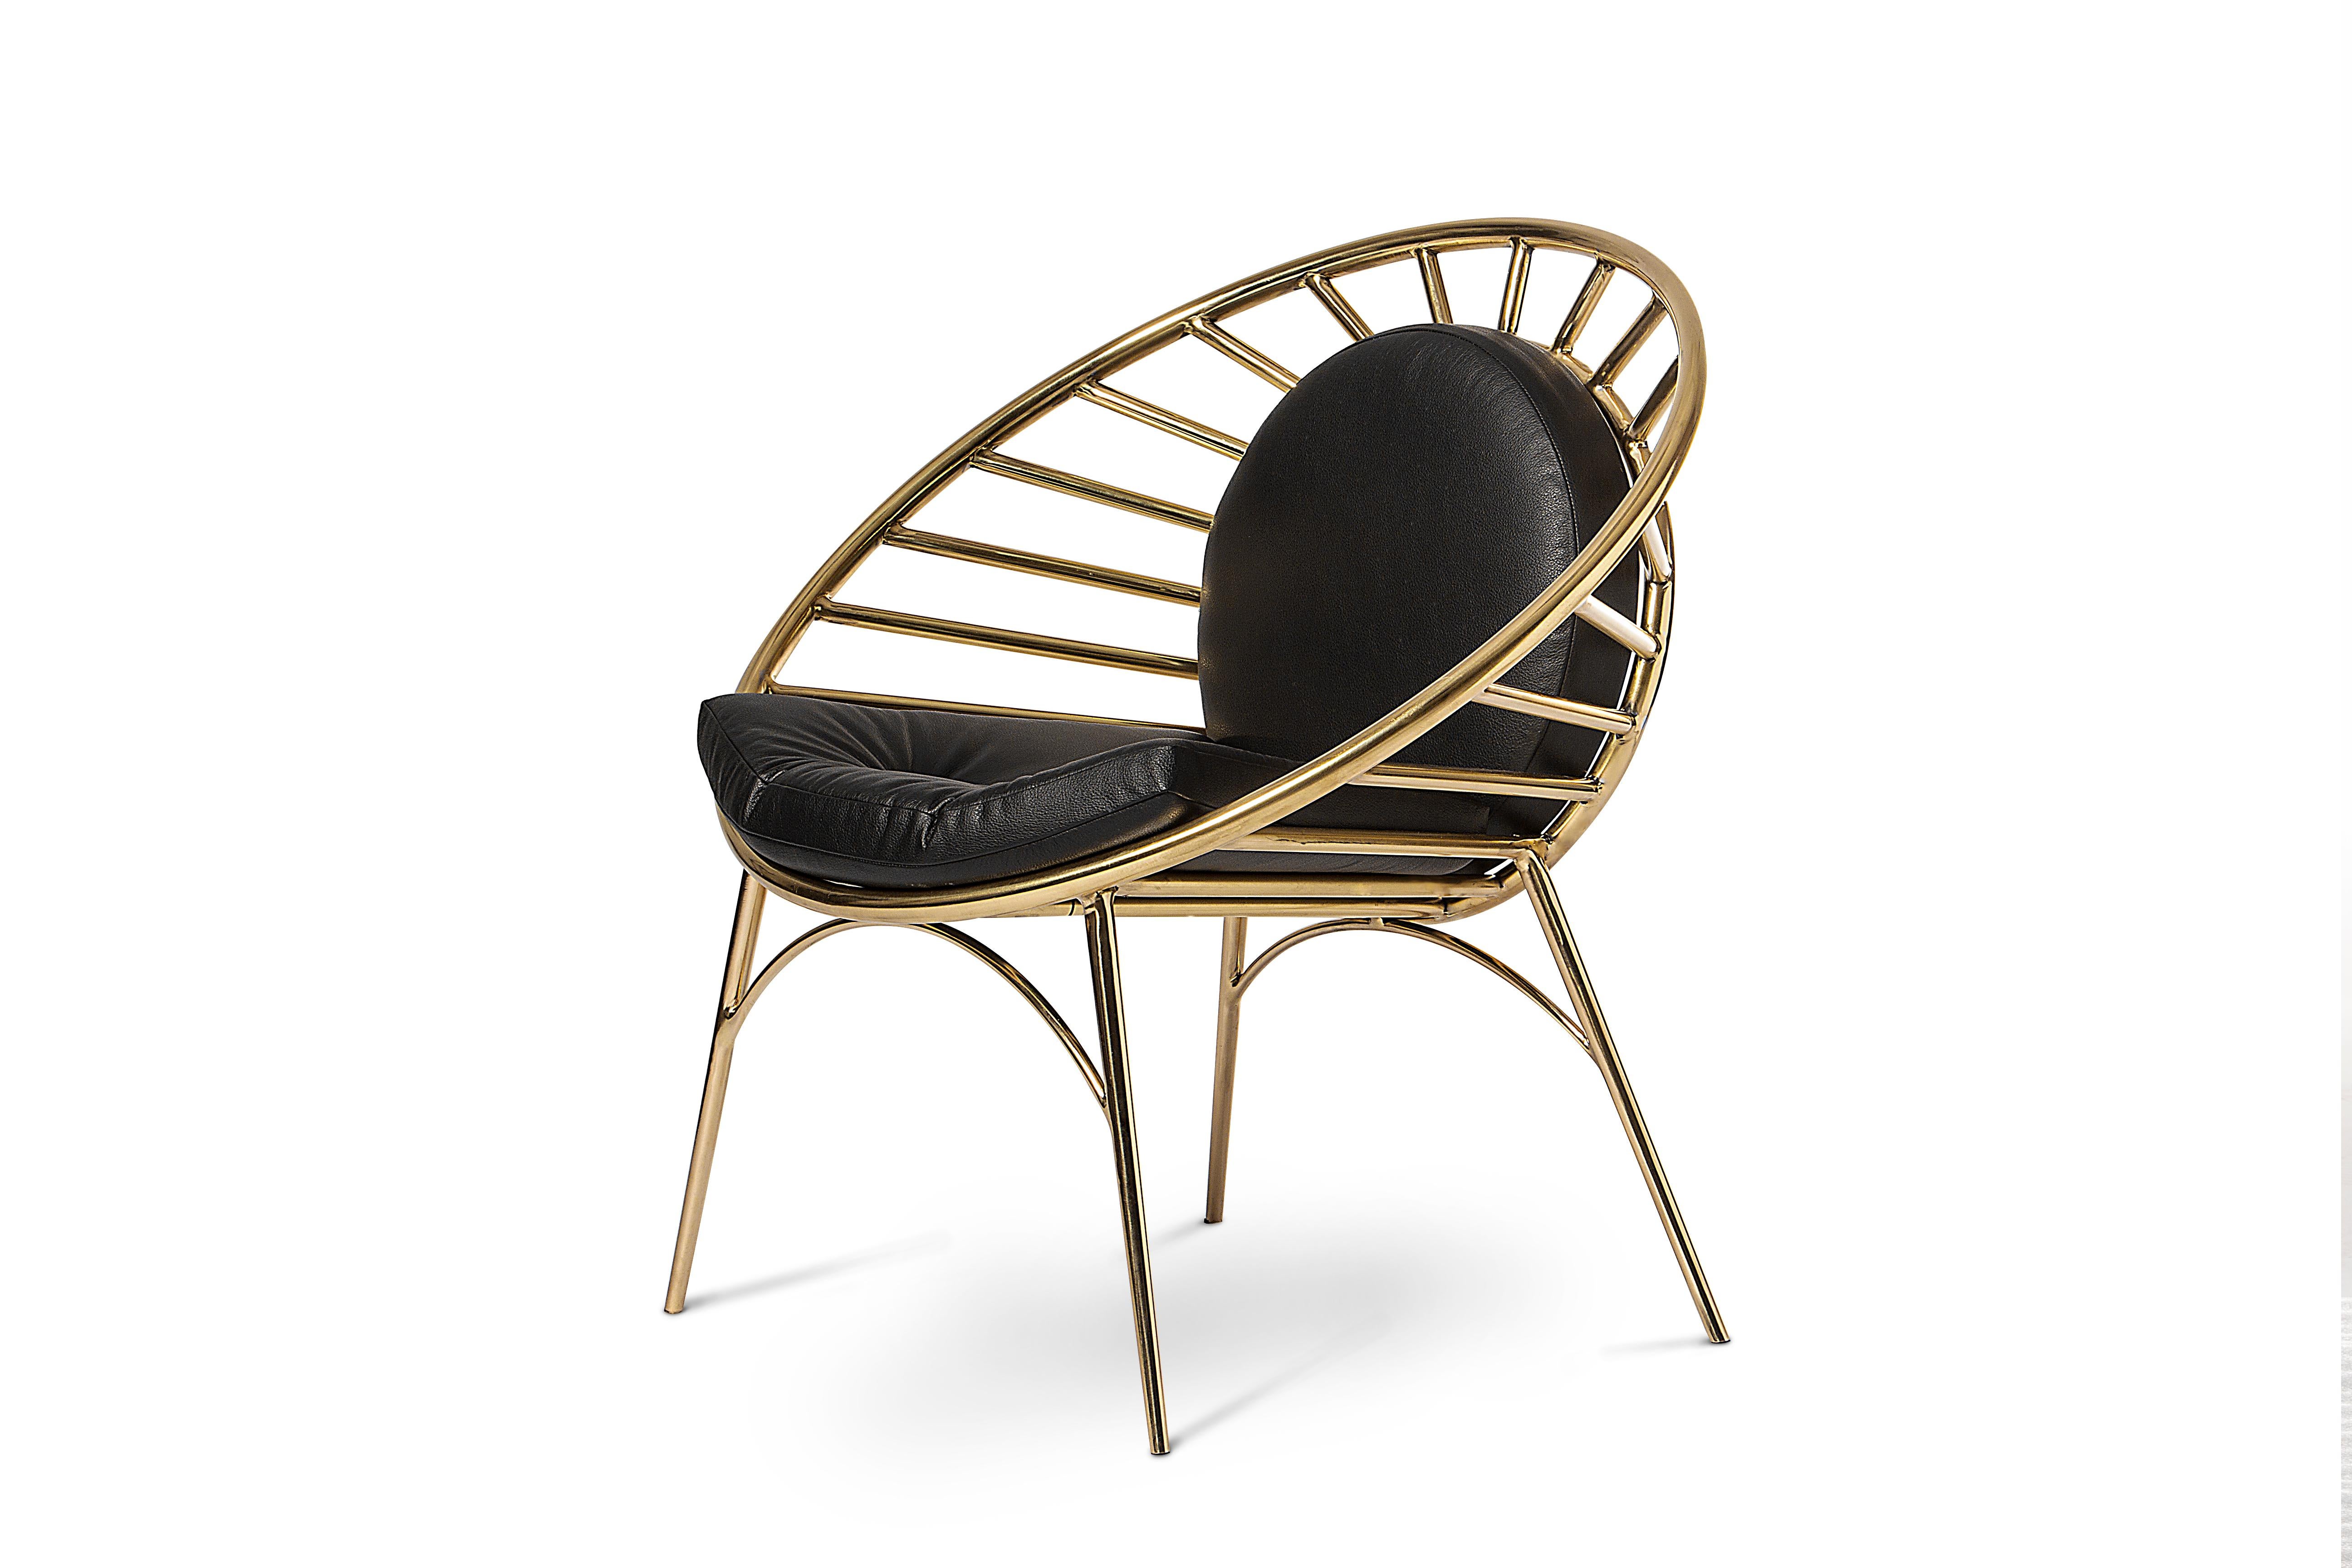 Reeves is an accent chair that could easily be considered a piece of futuristic furniture, due to its edgy and stylish design. The chair-back and legs are made of a tubular brass structure, simulating a crescent bow on the back, typical of Windsor